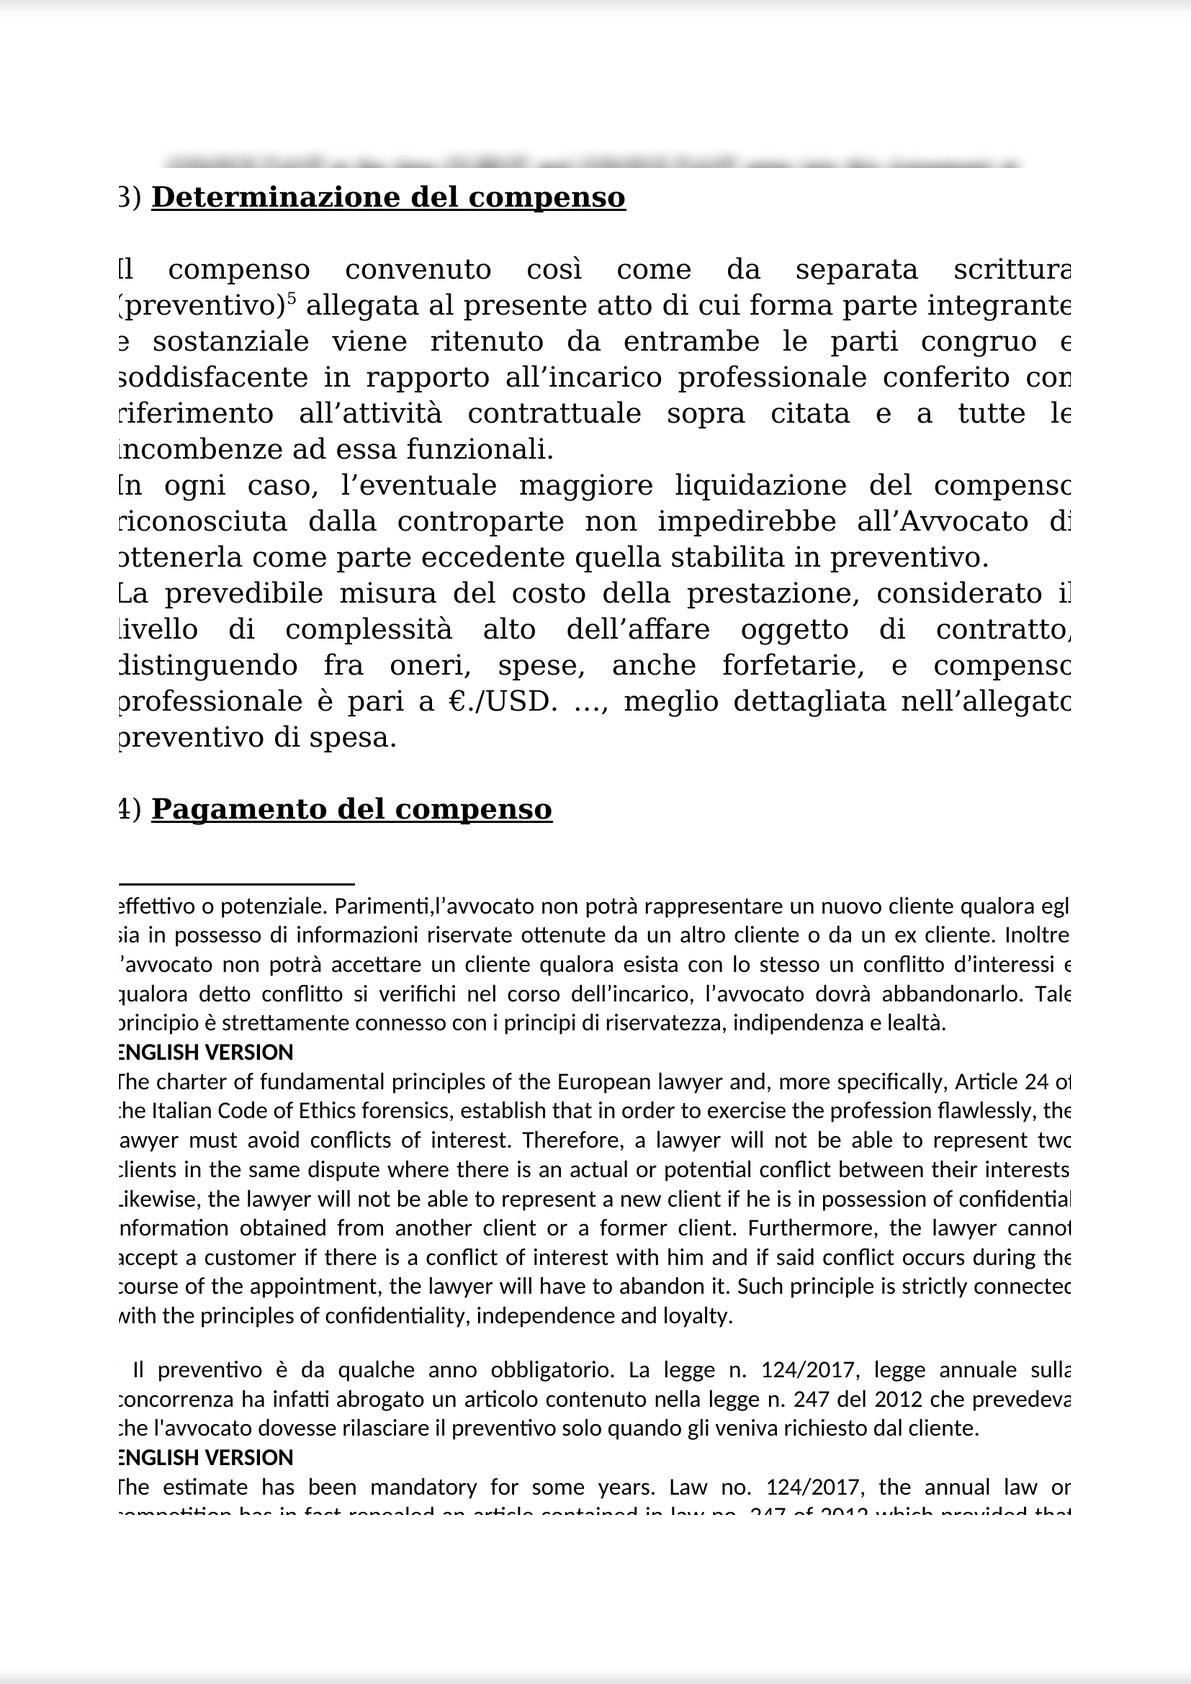 INTELLECTUAL WORK AGREEMENT FOR OUT-OF-COURT ACTIVITIES AND ATTACHMENTS 1 (PRIVACY); 2 (ANTI-MONEY LAUNDERING); AND 3 FEE QUOTE / CONTRATTO D’OPERA INTELLETTUALE STRAGIUDIZIALE-4